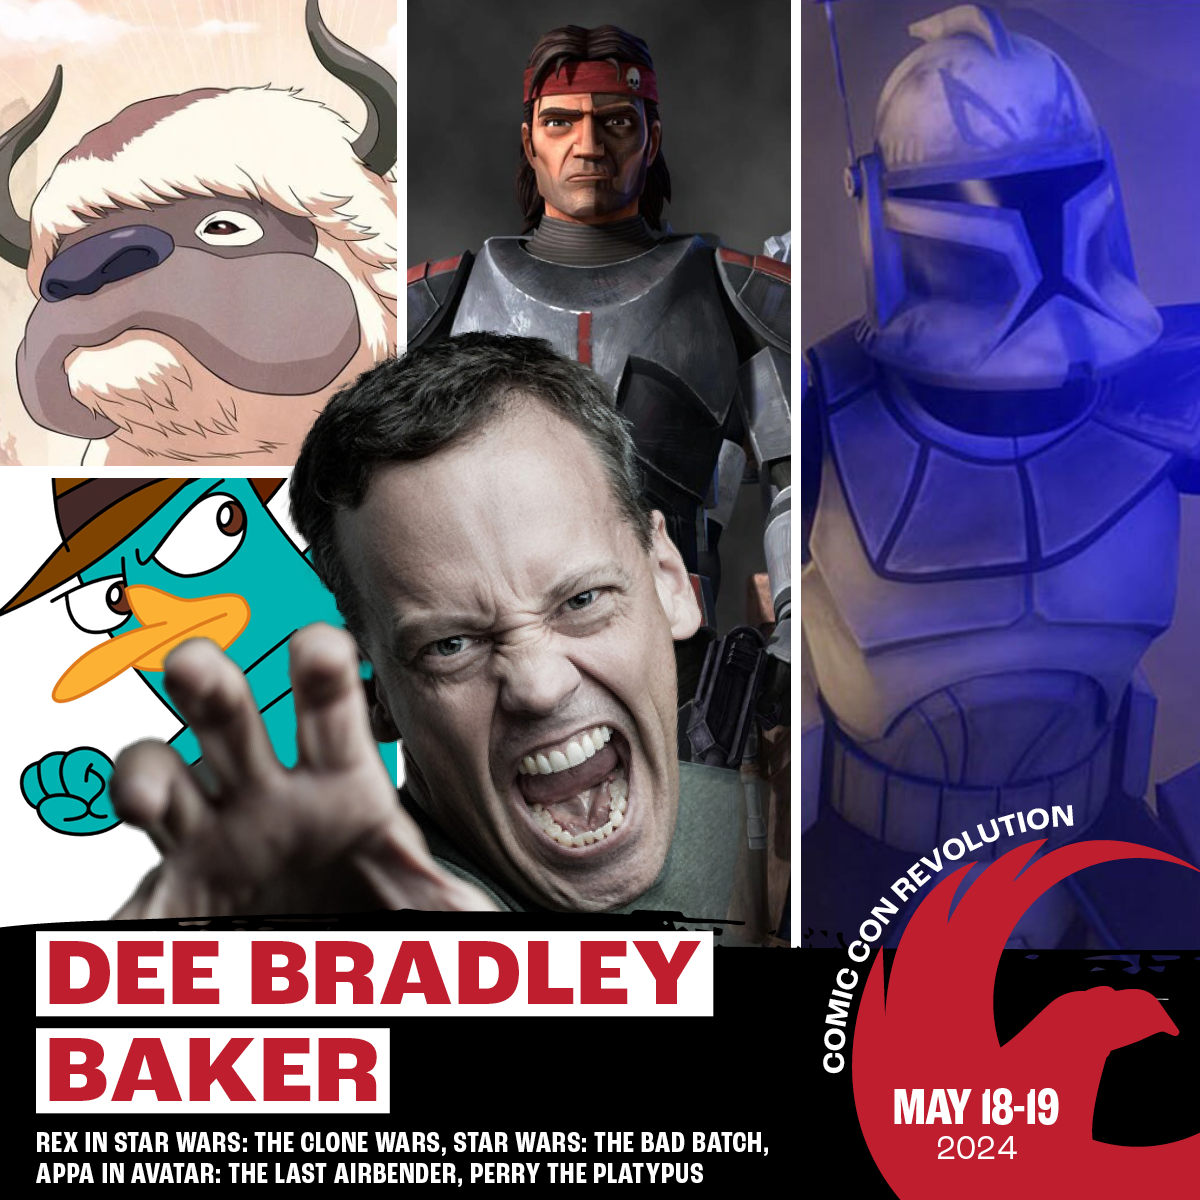 Dee bradley and star wars characters in a poster.